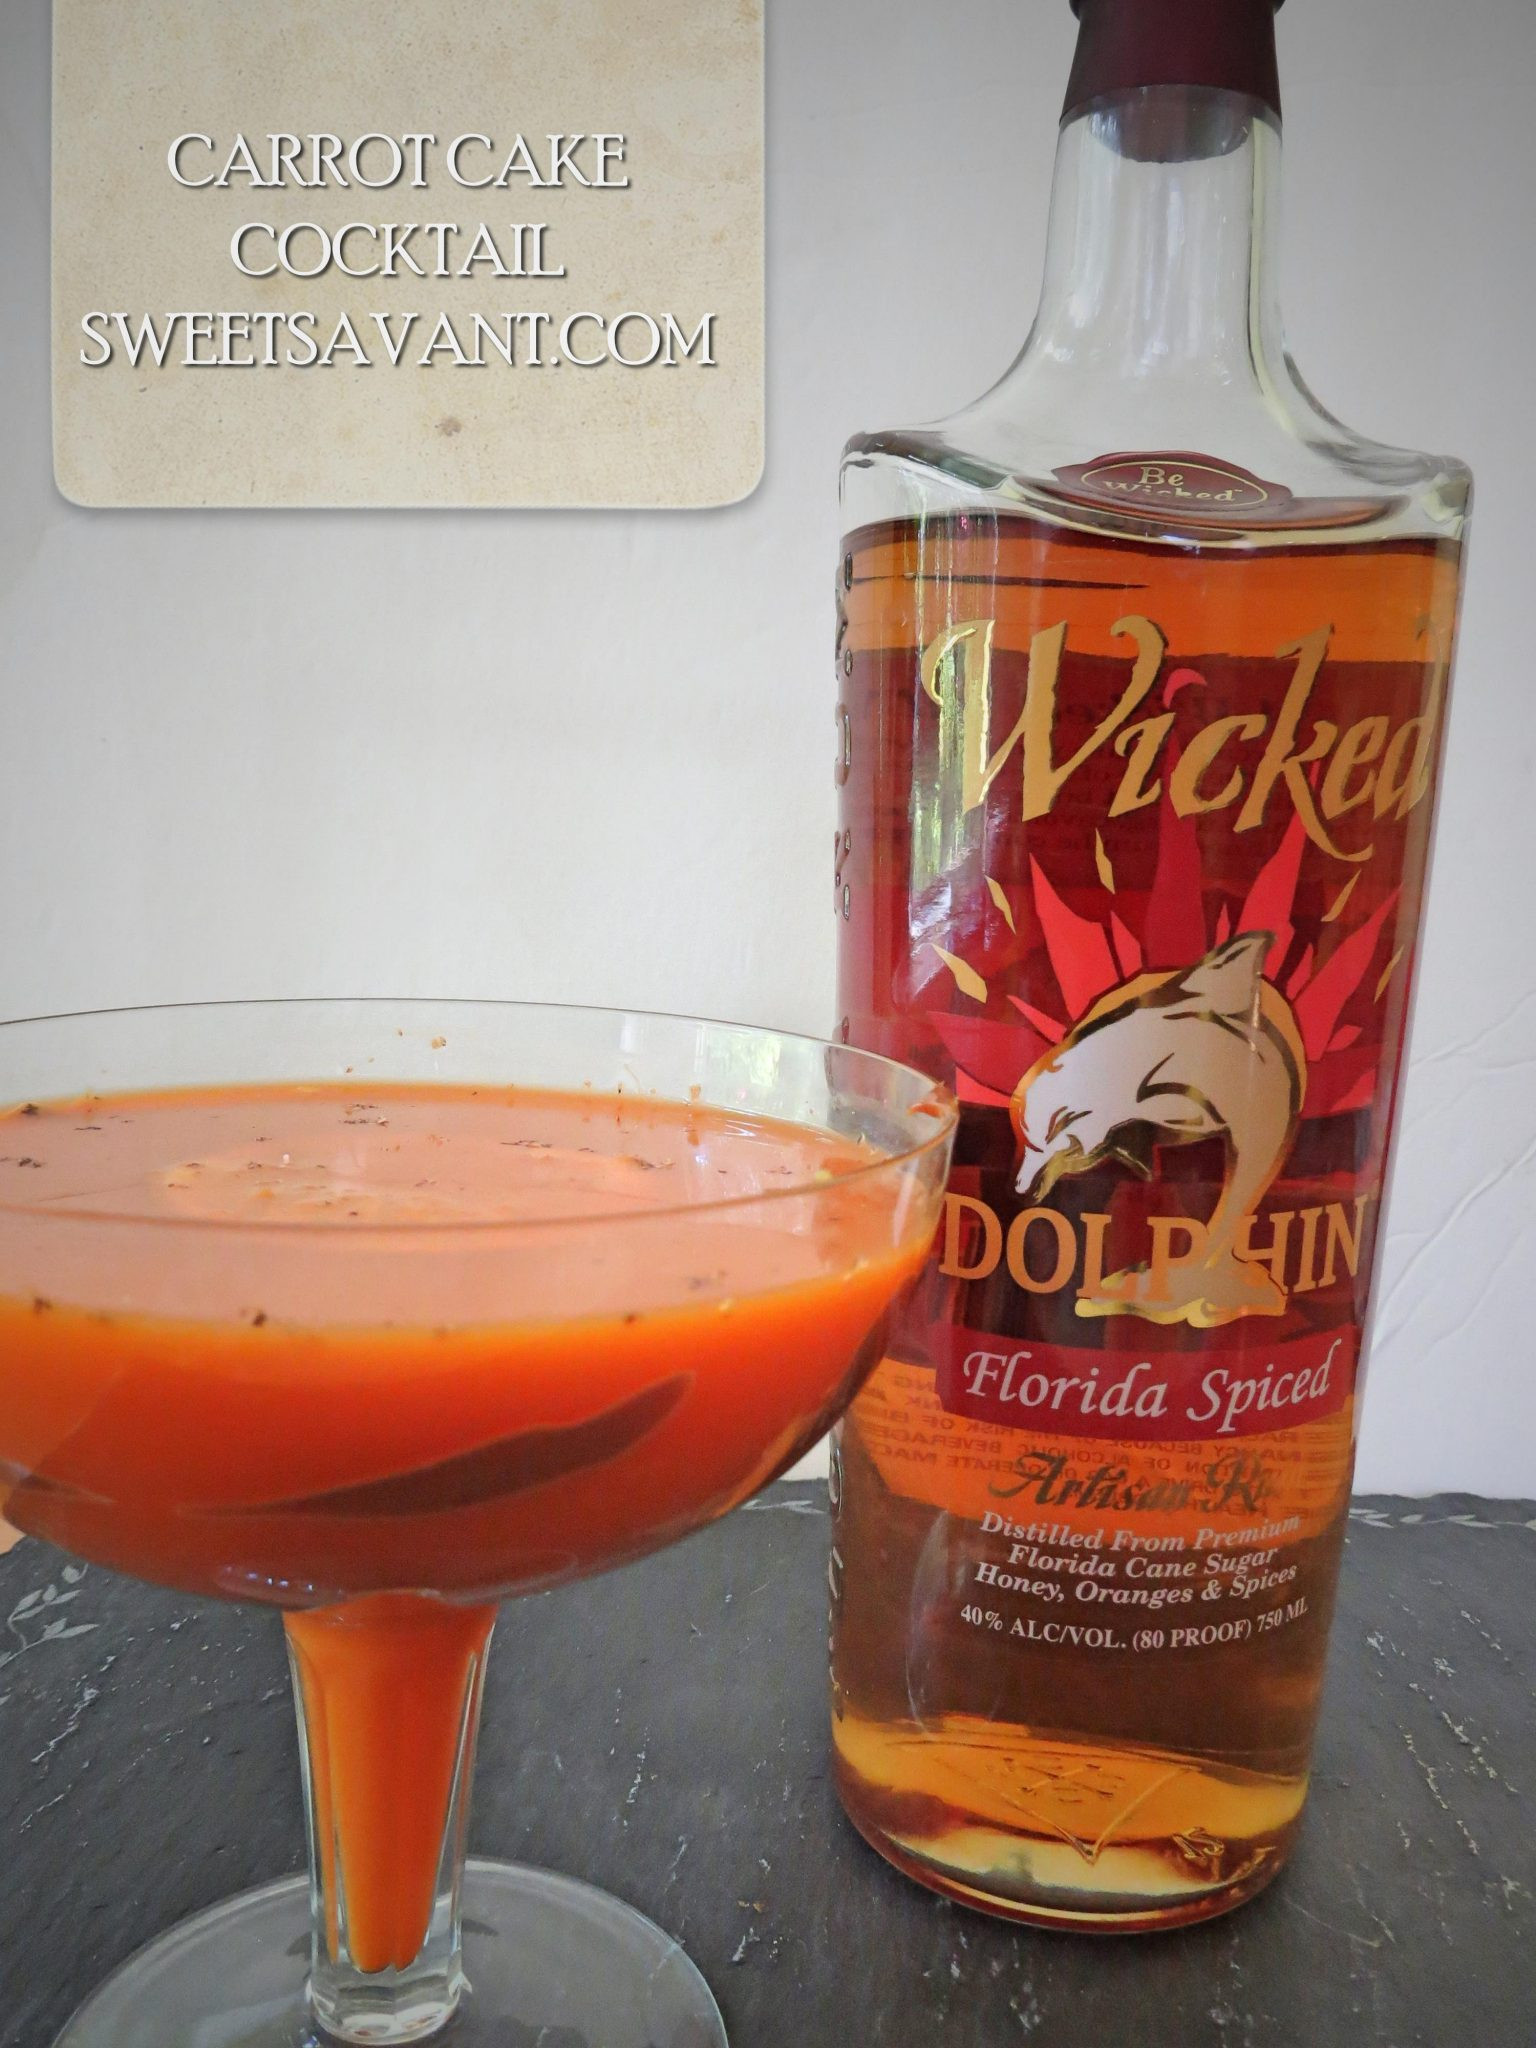 Carrot Cake Cocktail
 Carrot Cake Punch with Wicked Dolphin Spiced Rum